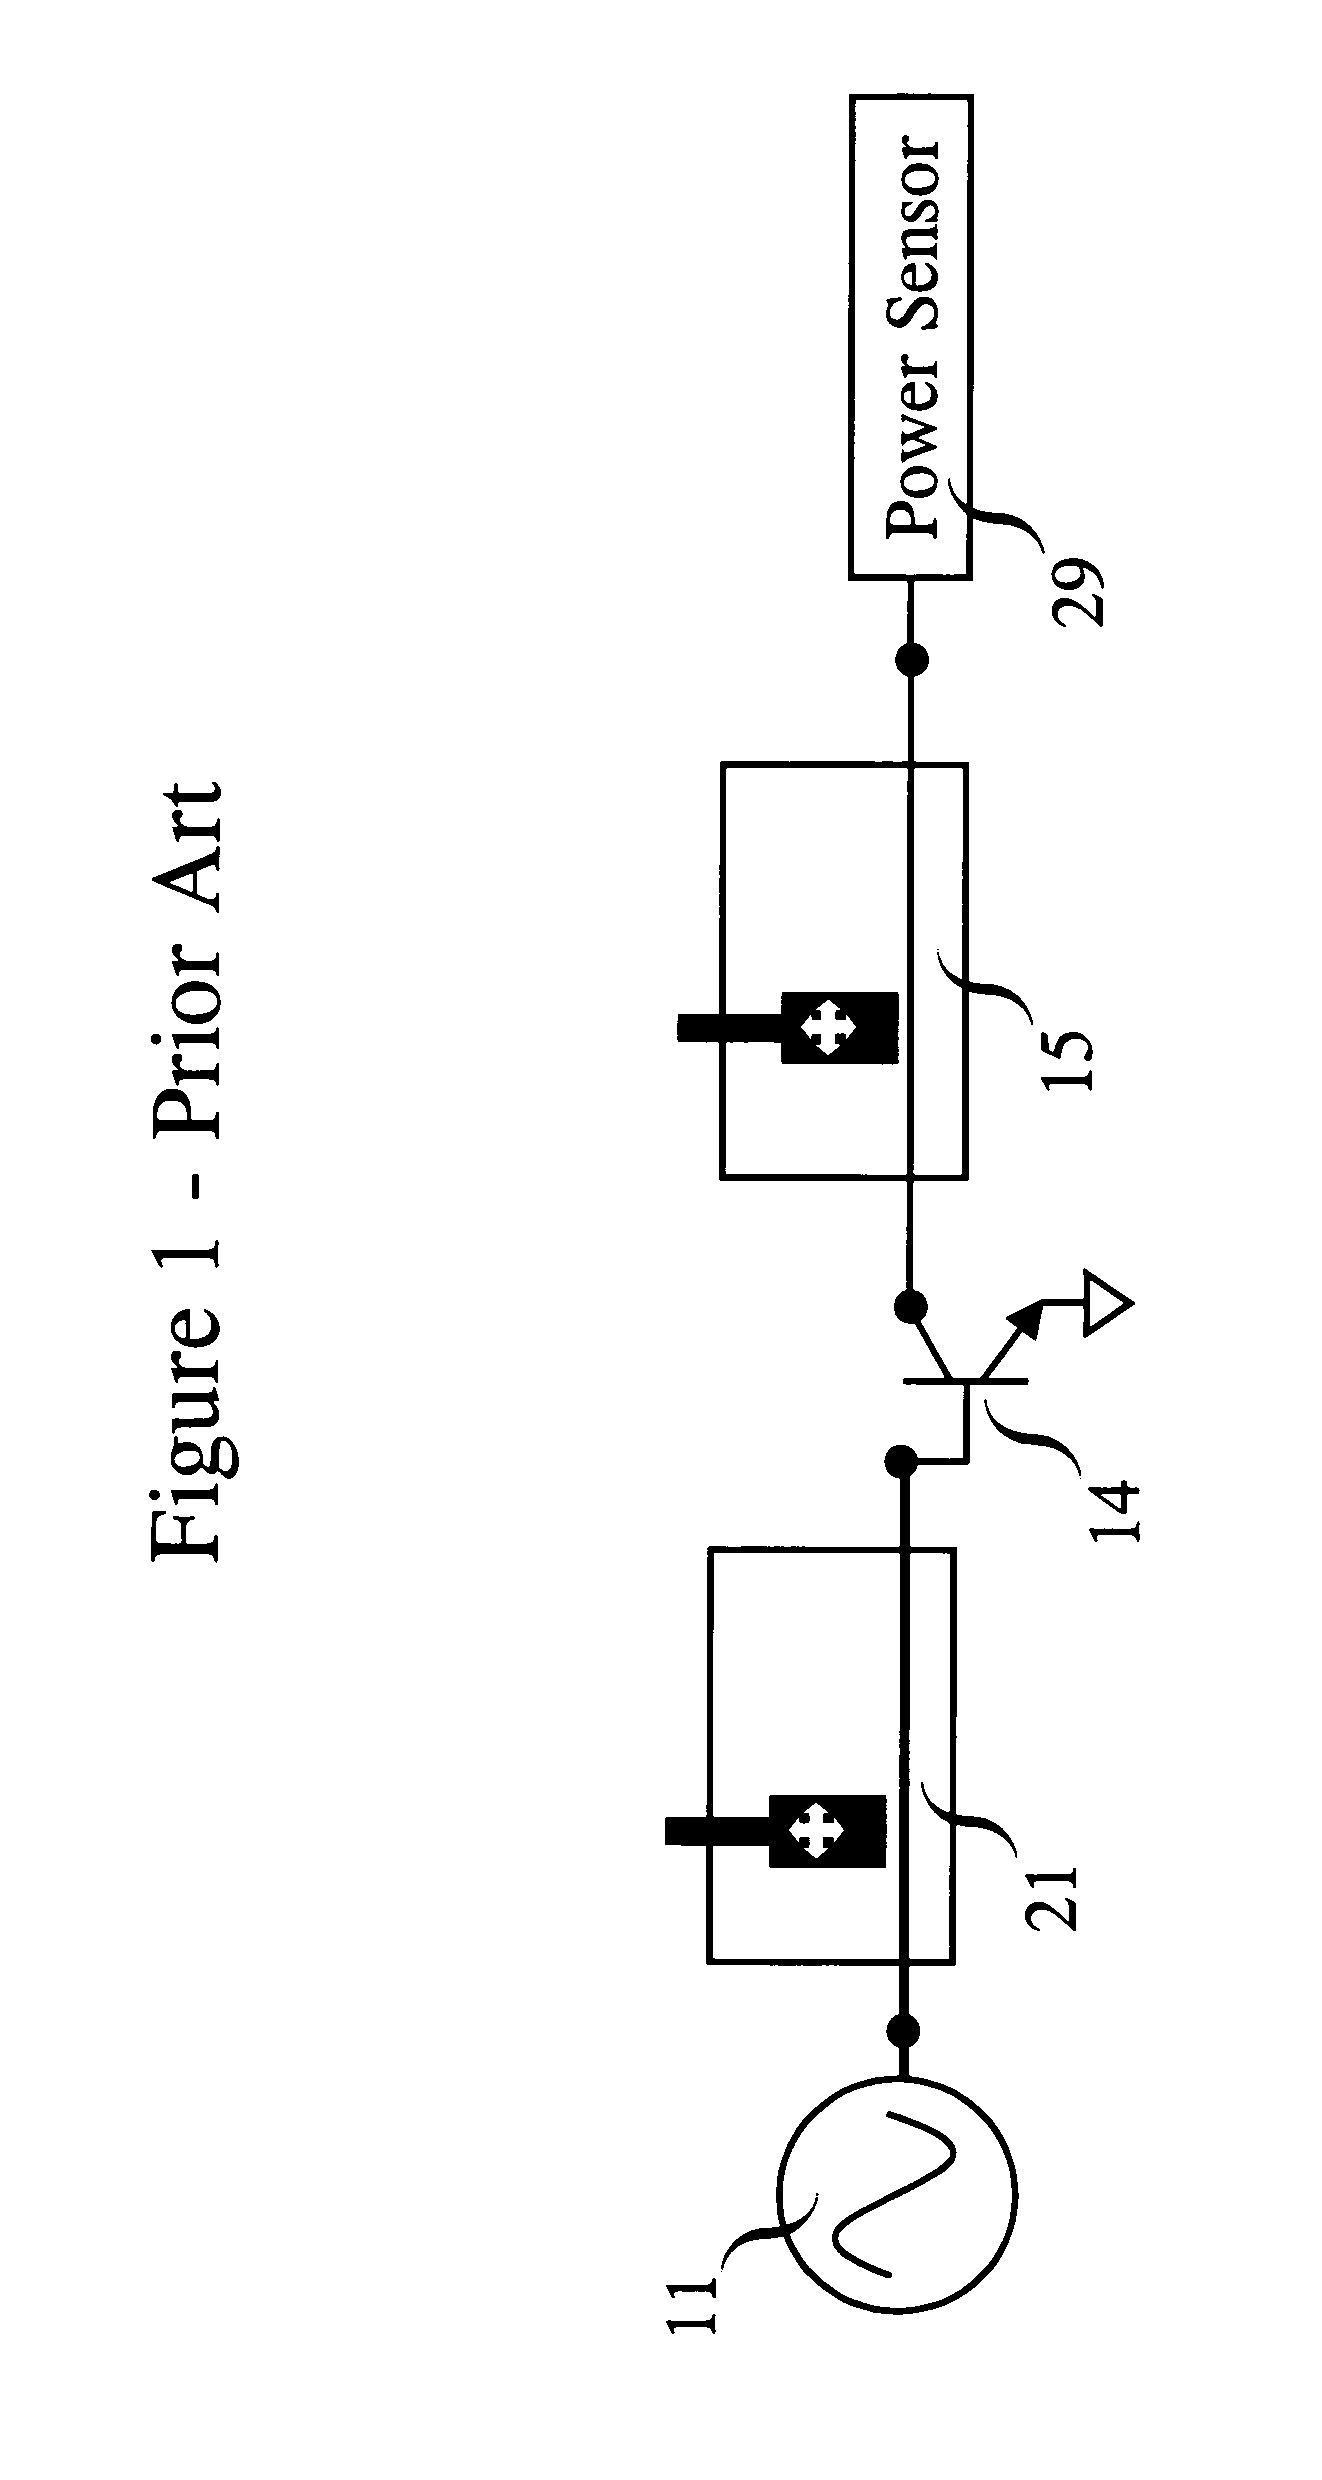 Method for Calibrating a Real-Time Load-Pull System